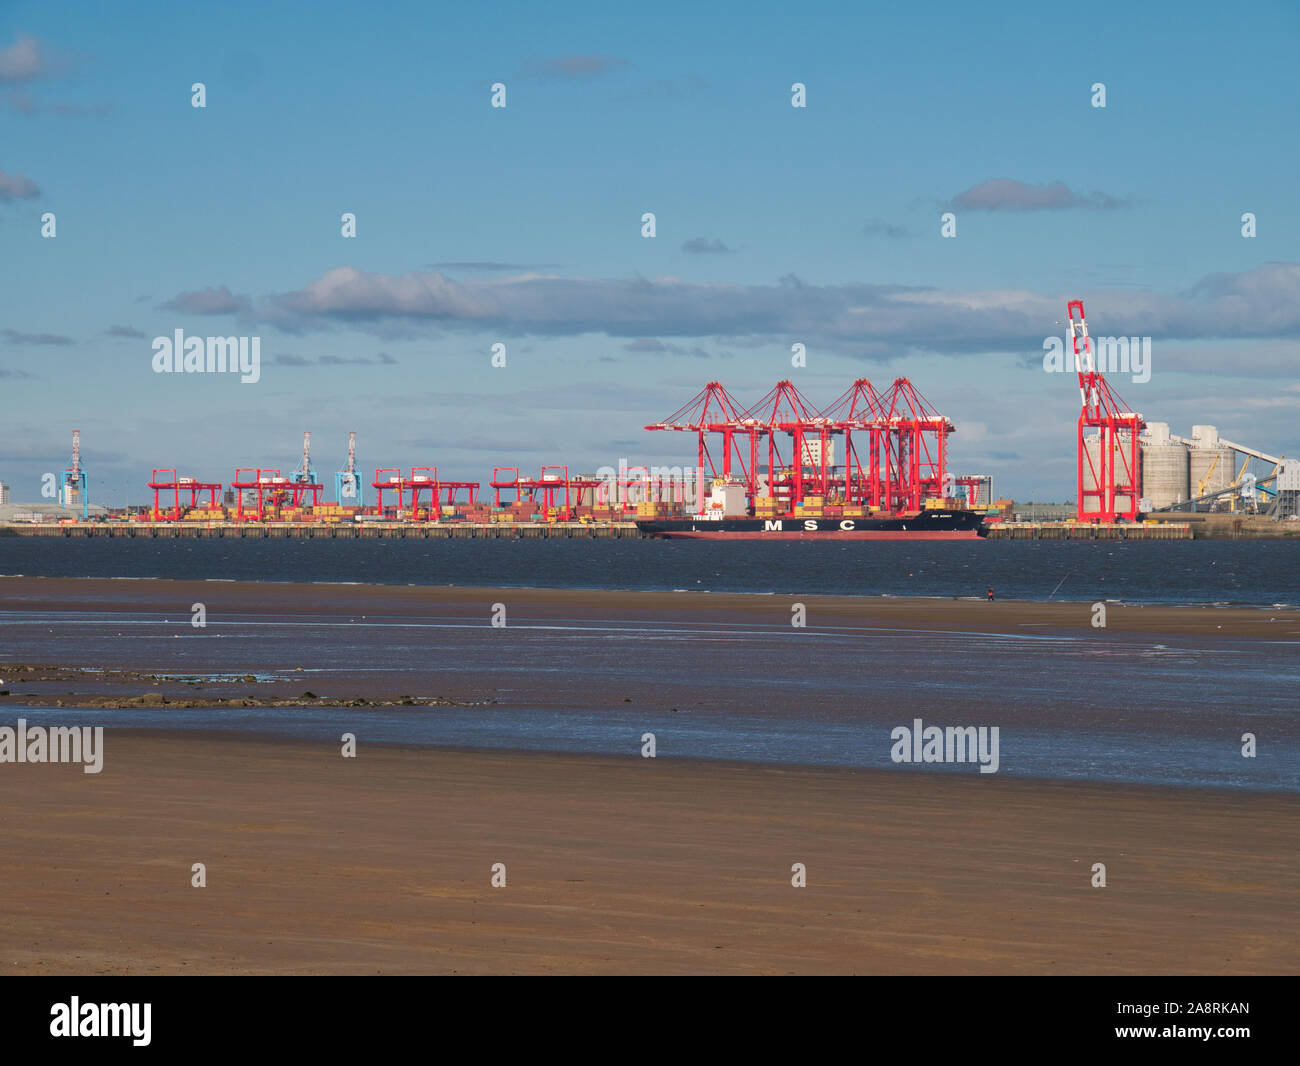 Liverpool2 - a £400 million deep-water container terminal at the Port of Liverpool, capable of taking the largest vessels. Stock Photo